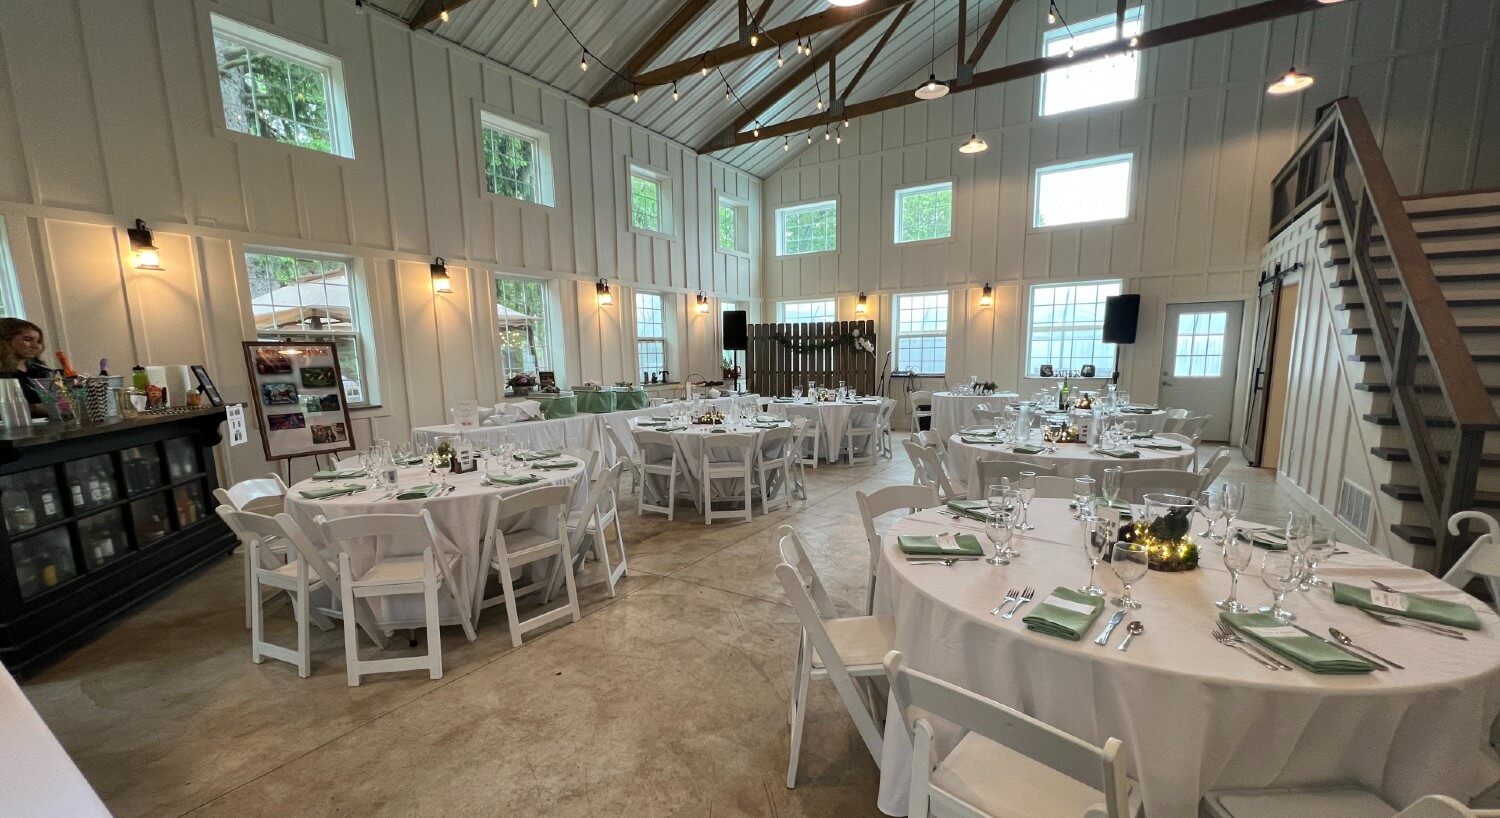 A large white barn venue with wood beams set up for a wedding event with several round tables